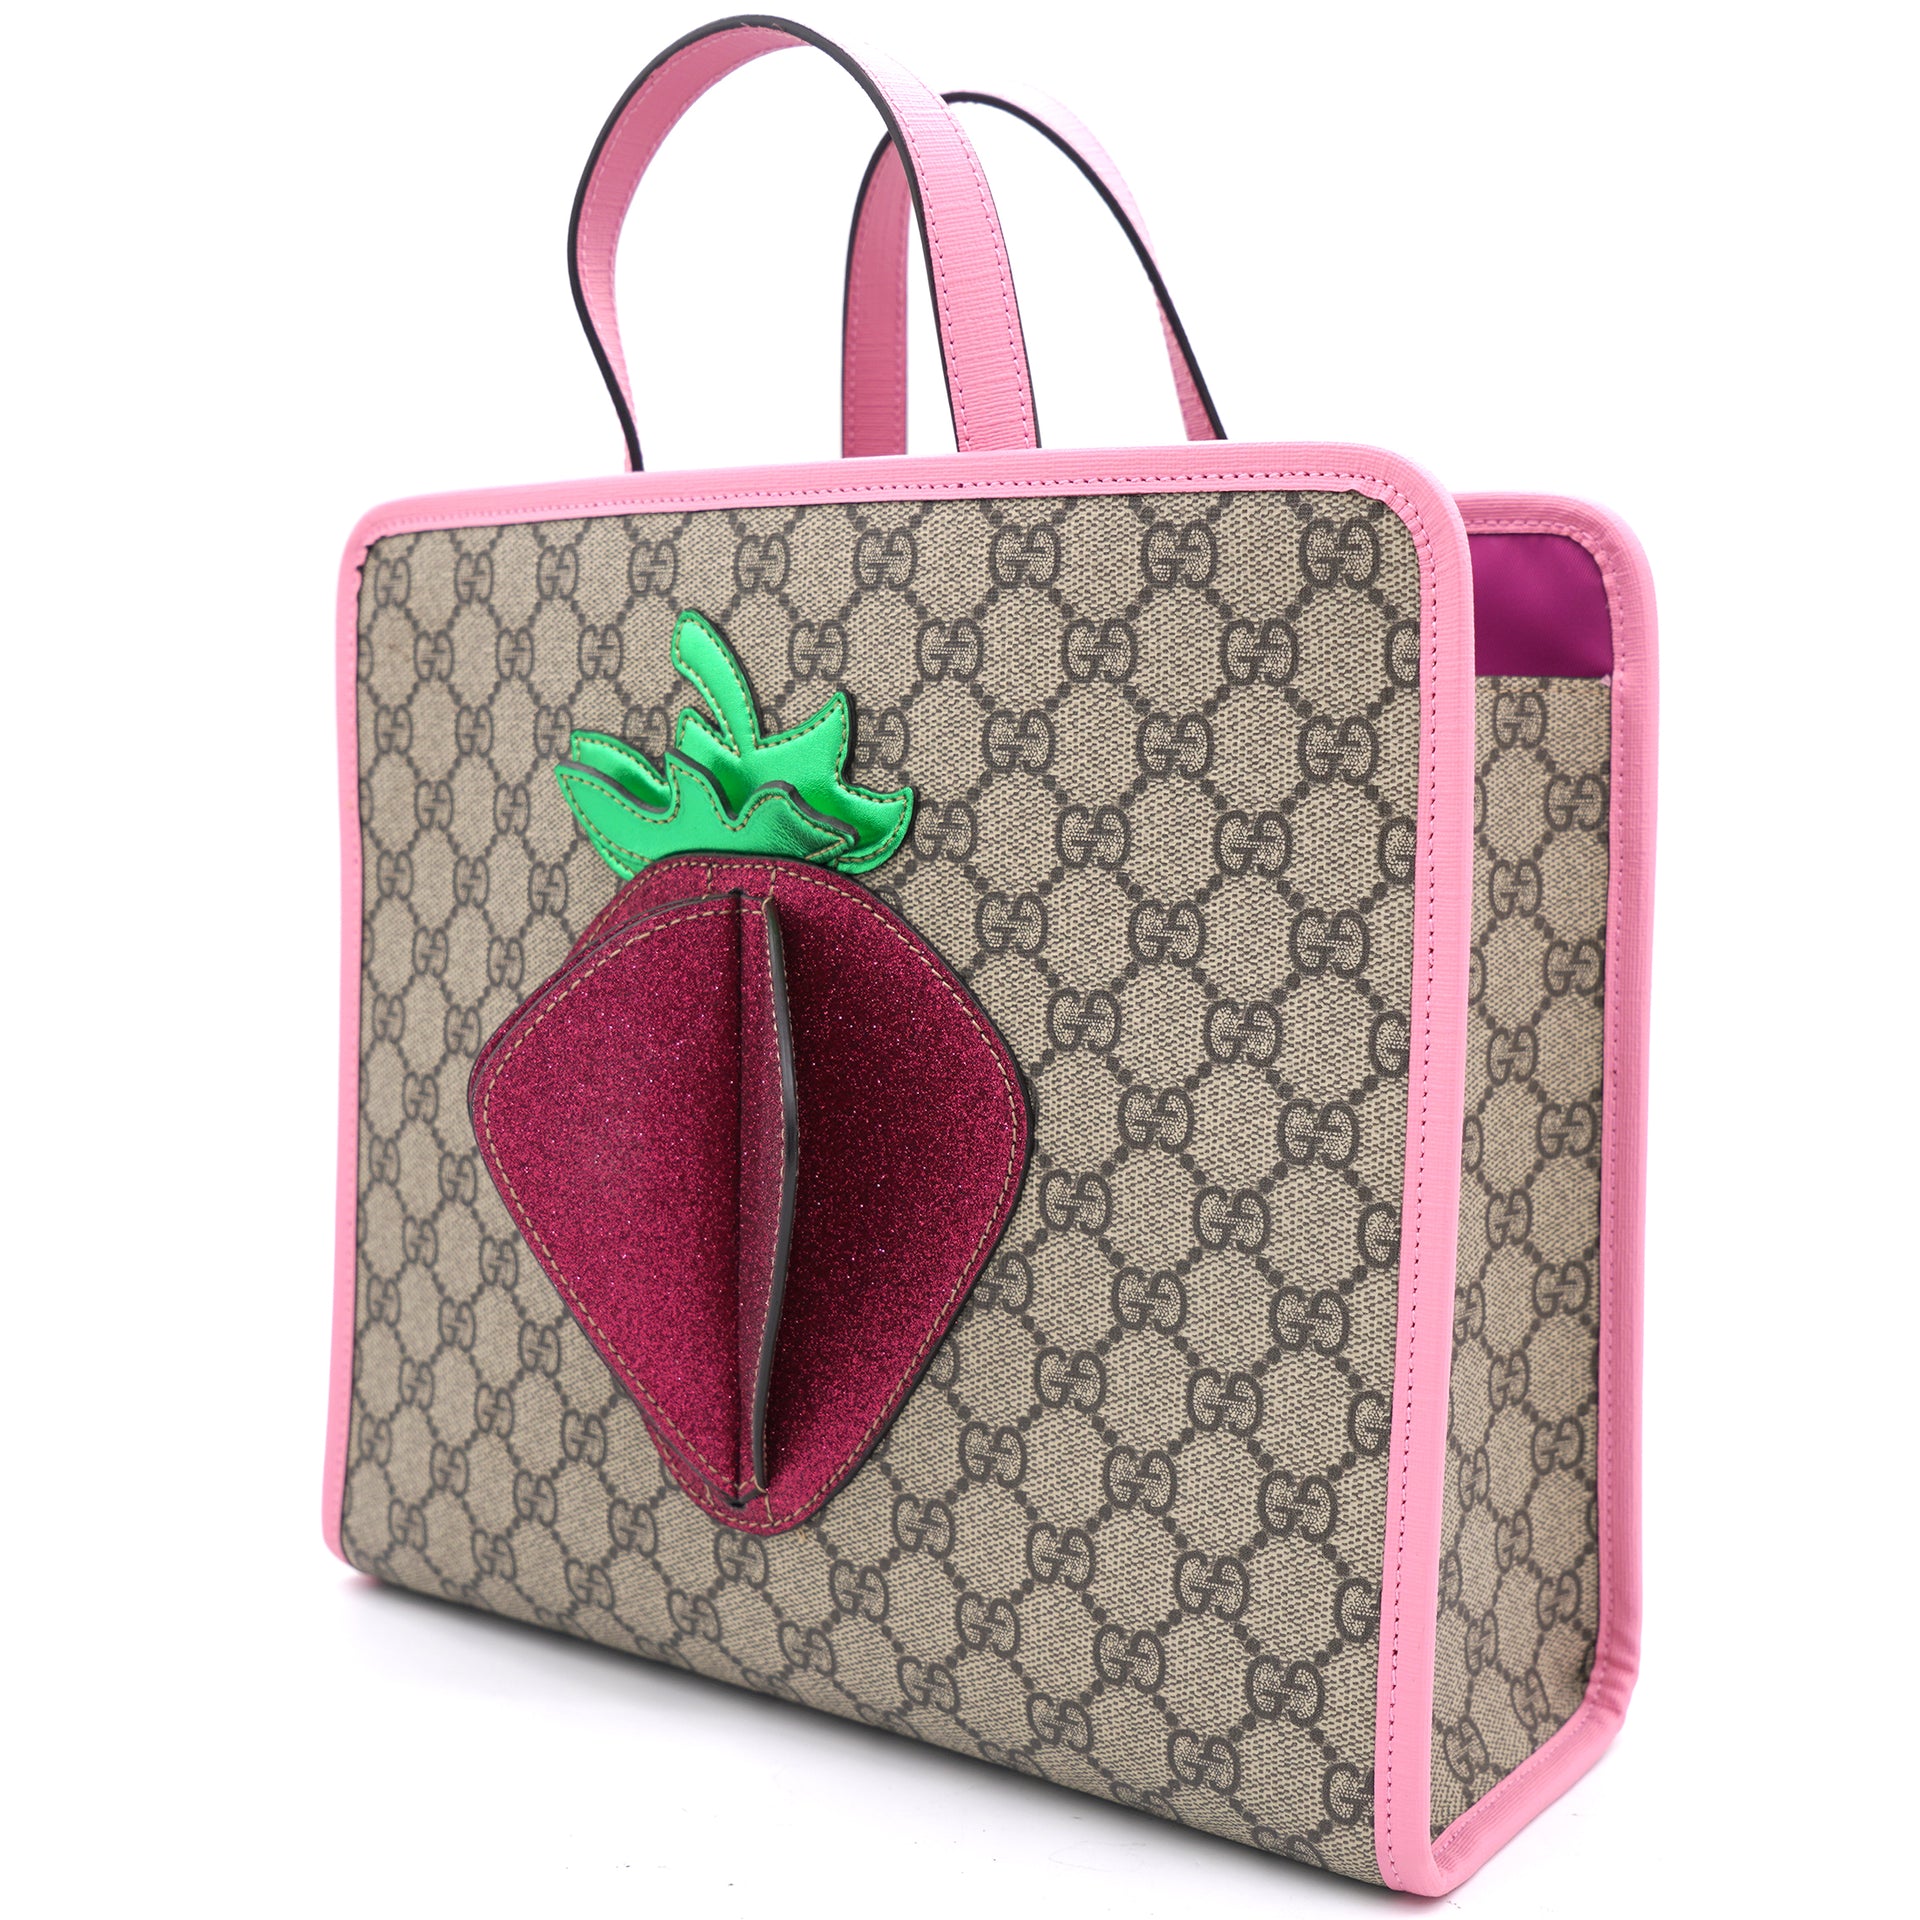 Kids Strawberry Tote Bag Pink Limited Edition